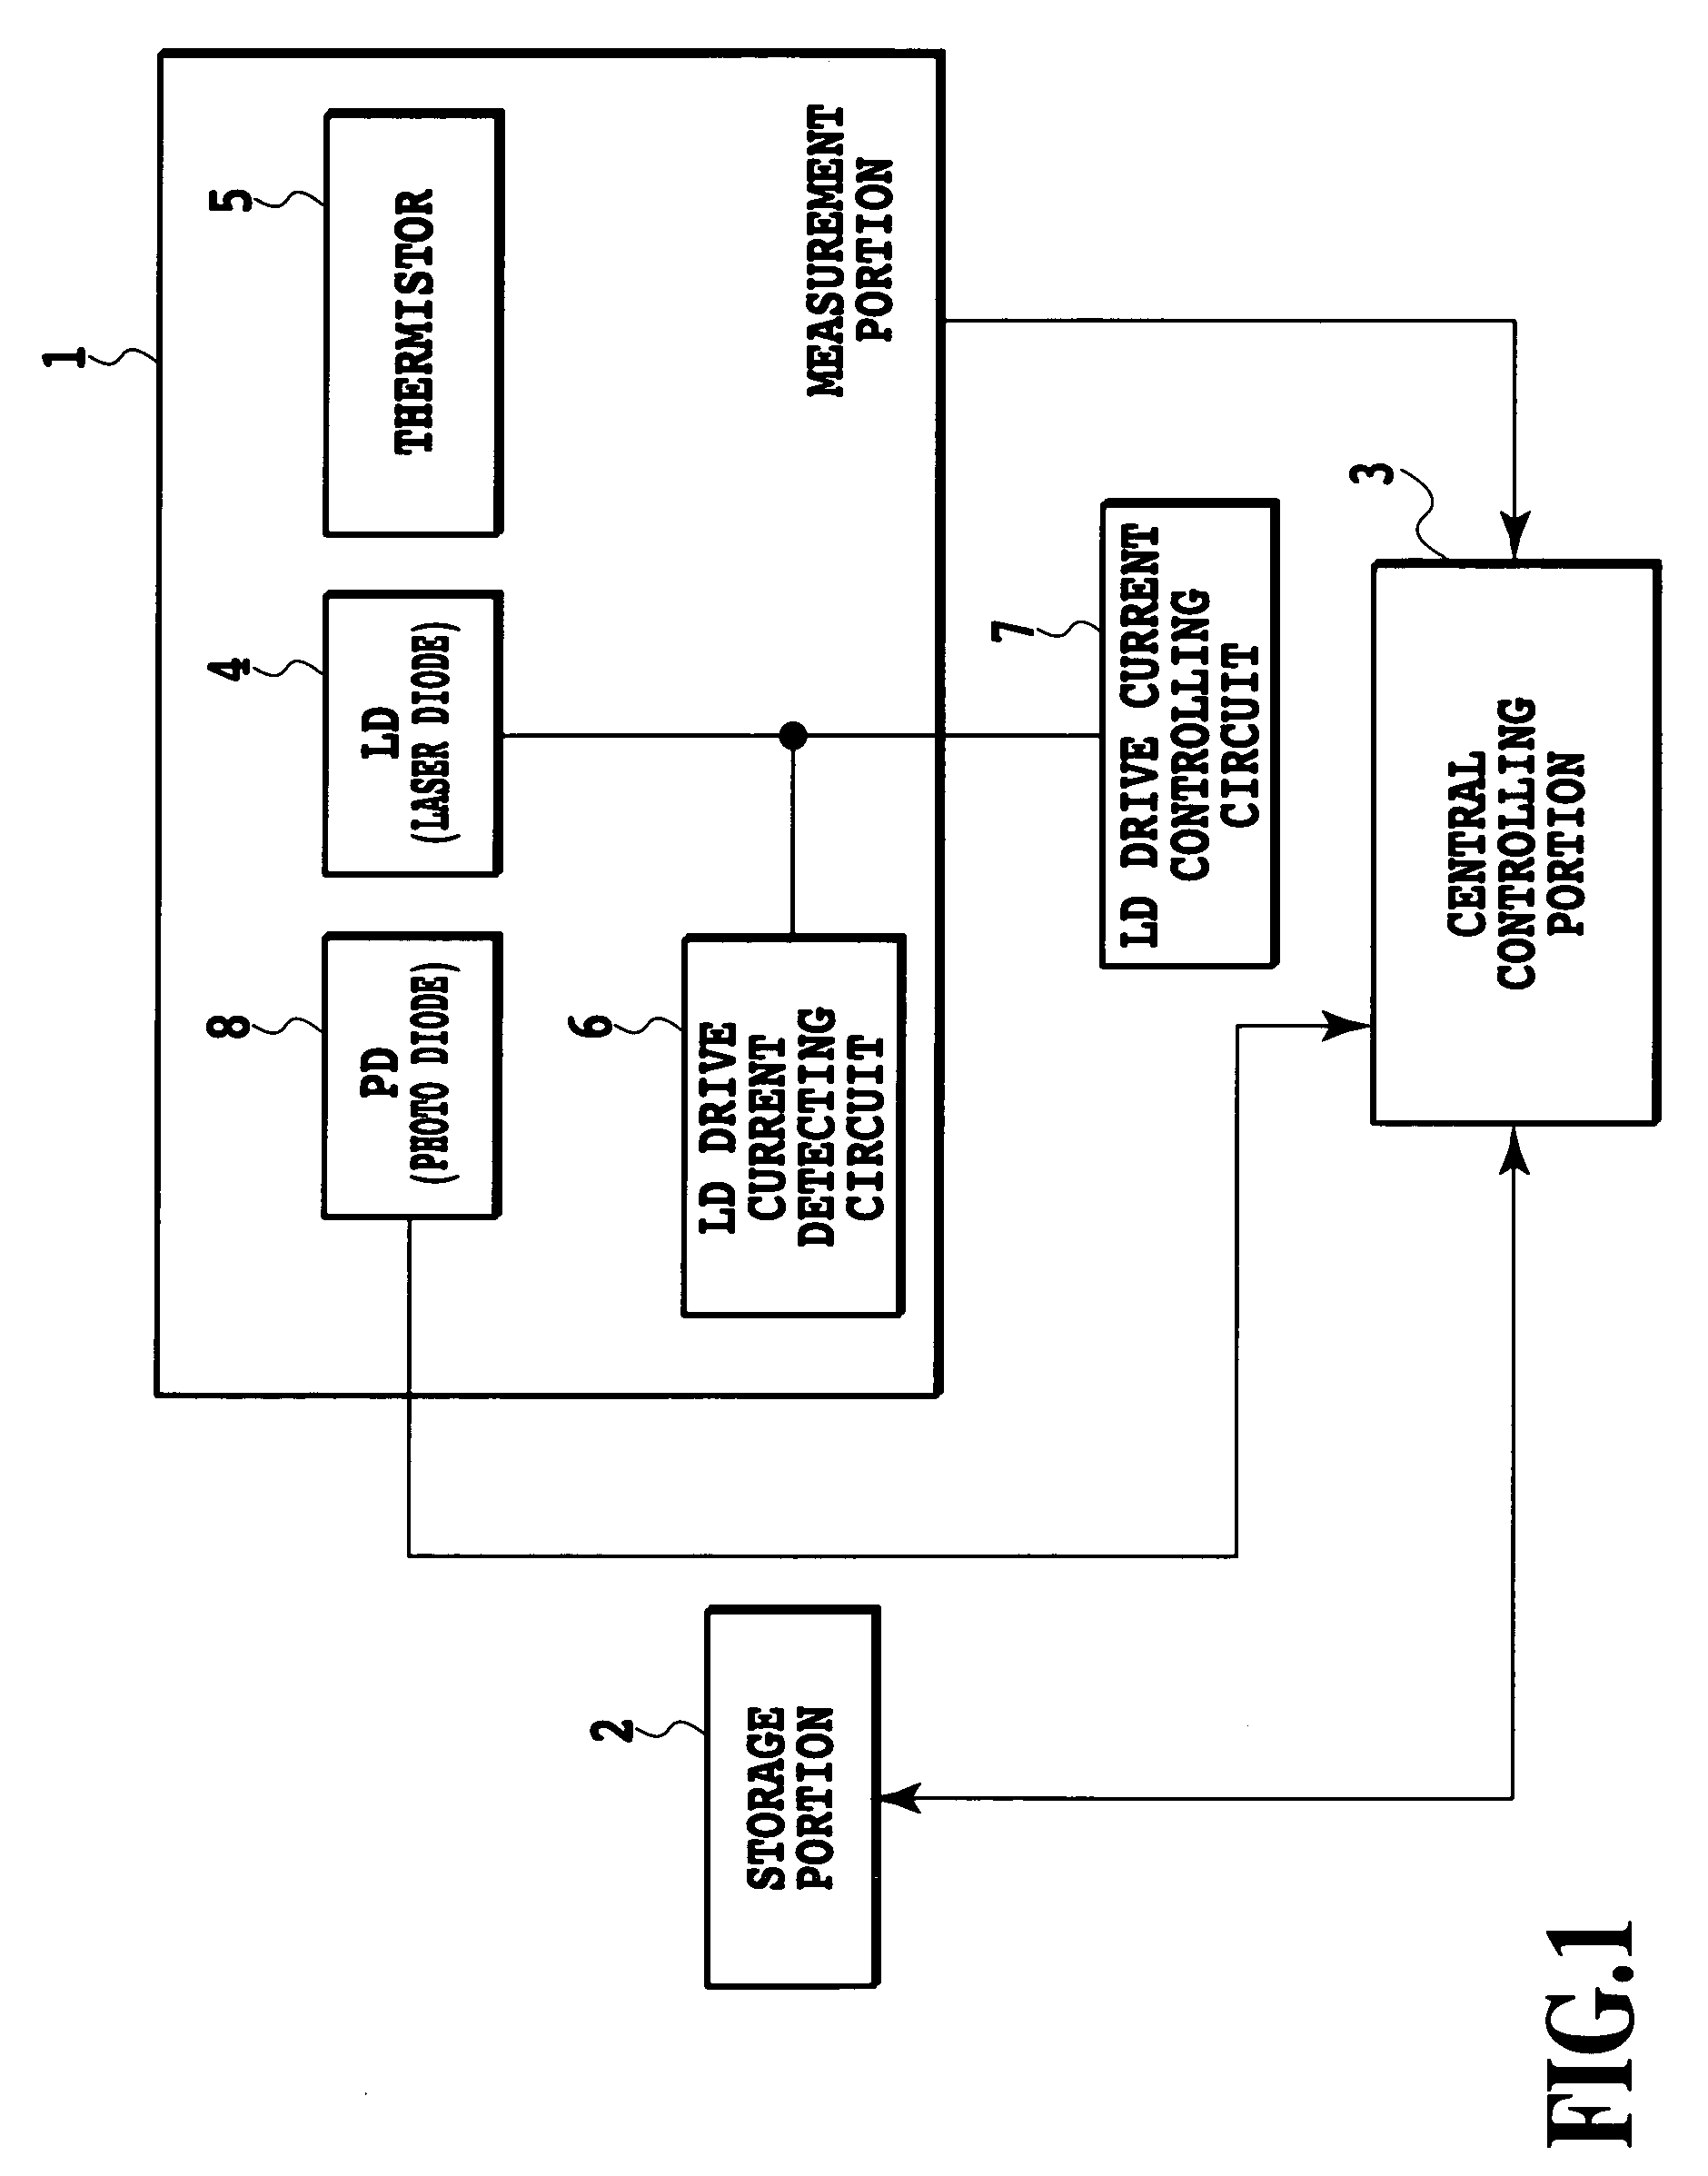 Optical module and method for monitoring and controlling wavelengths